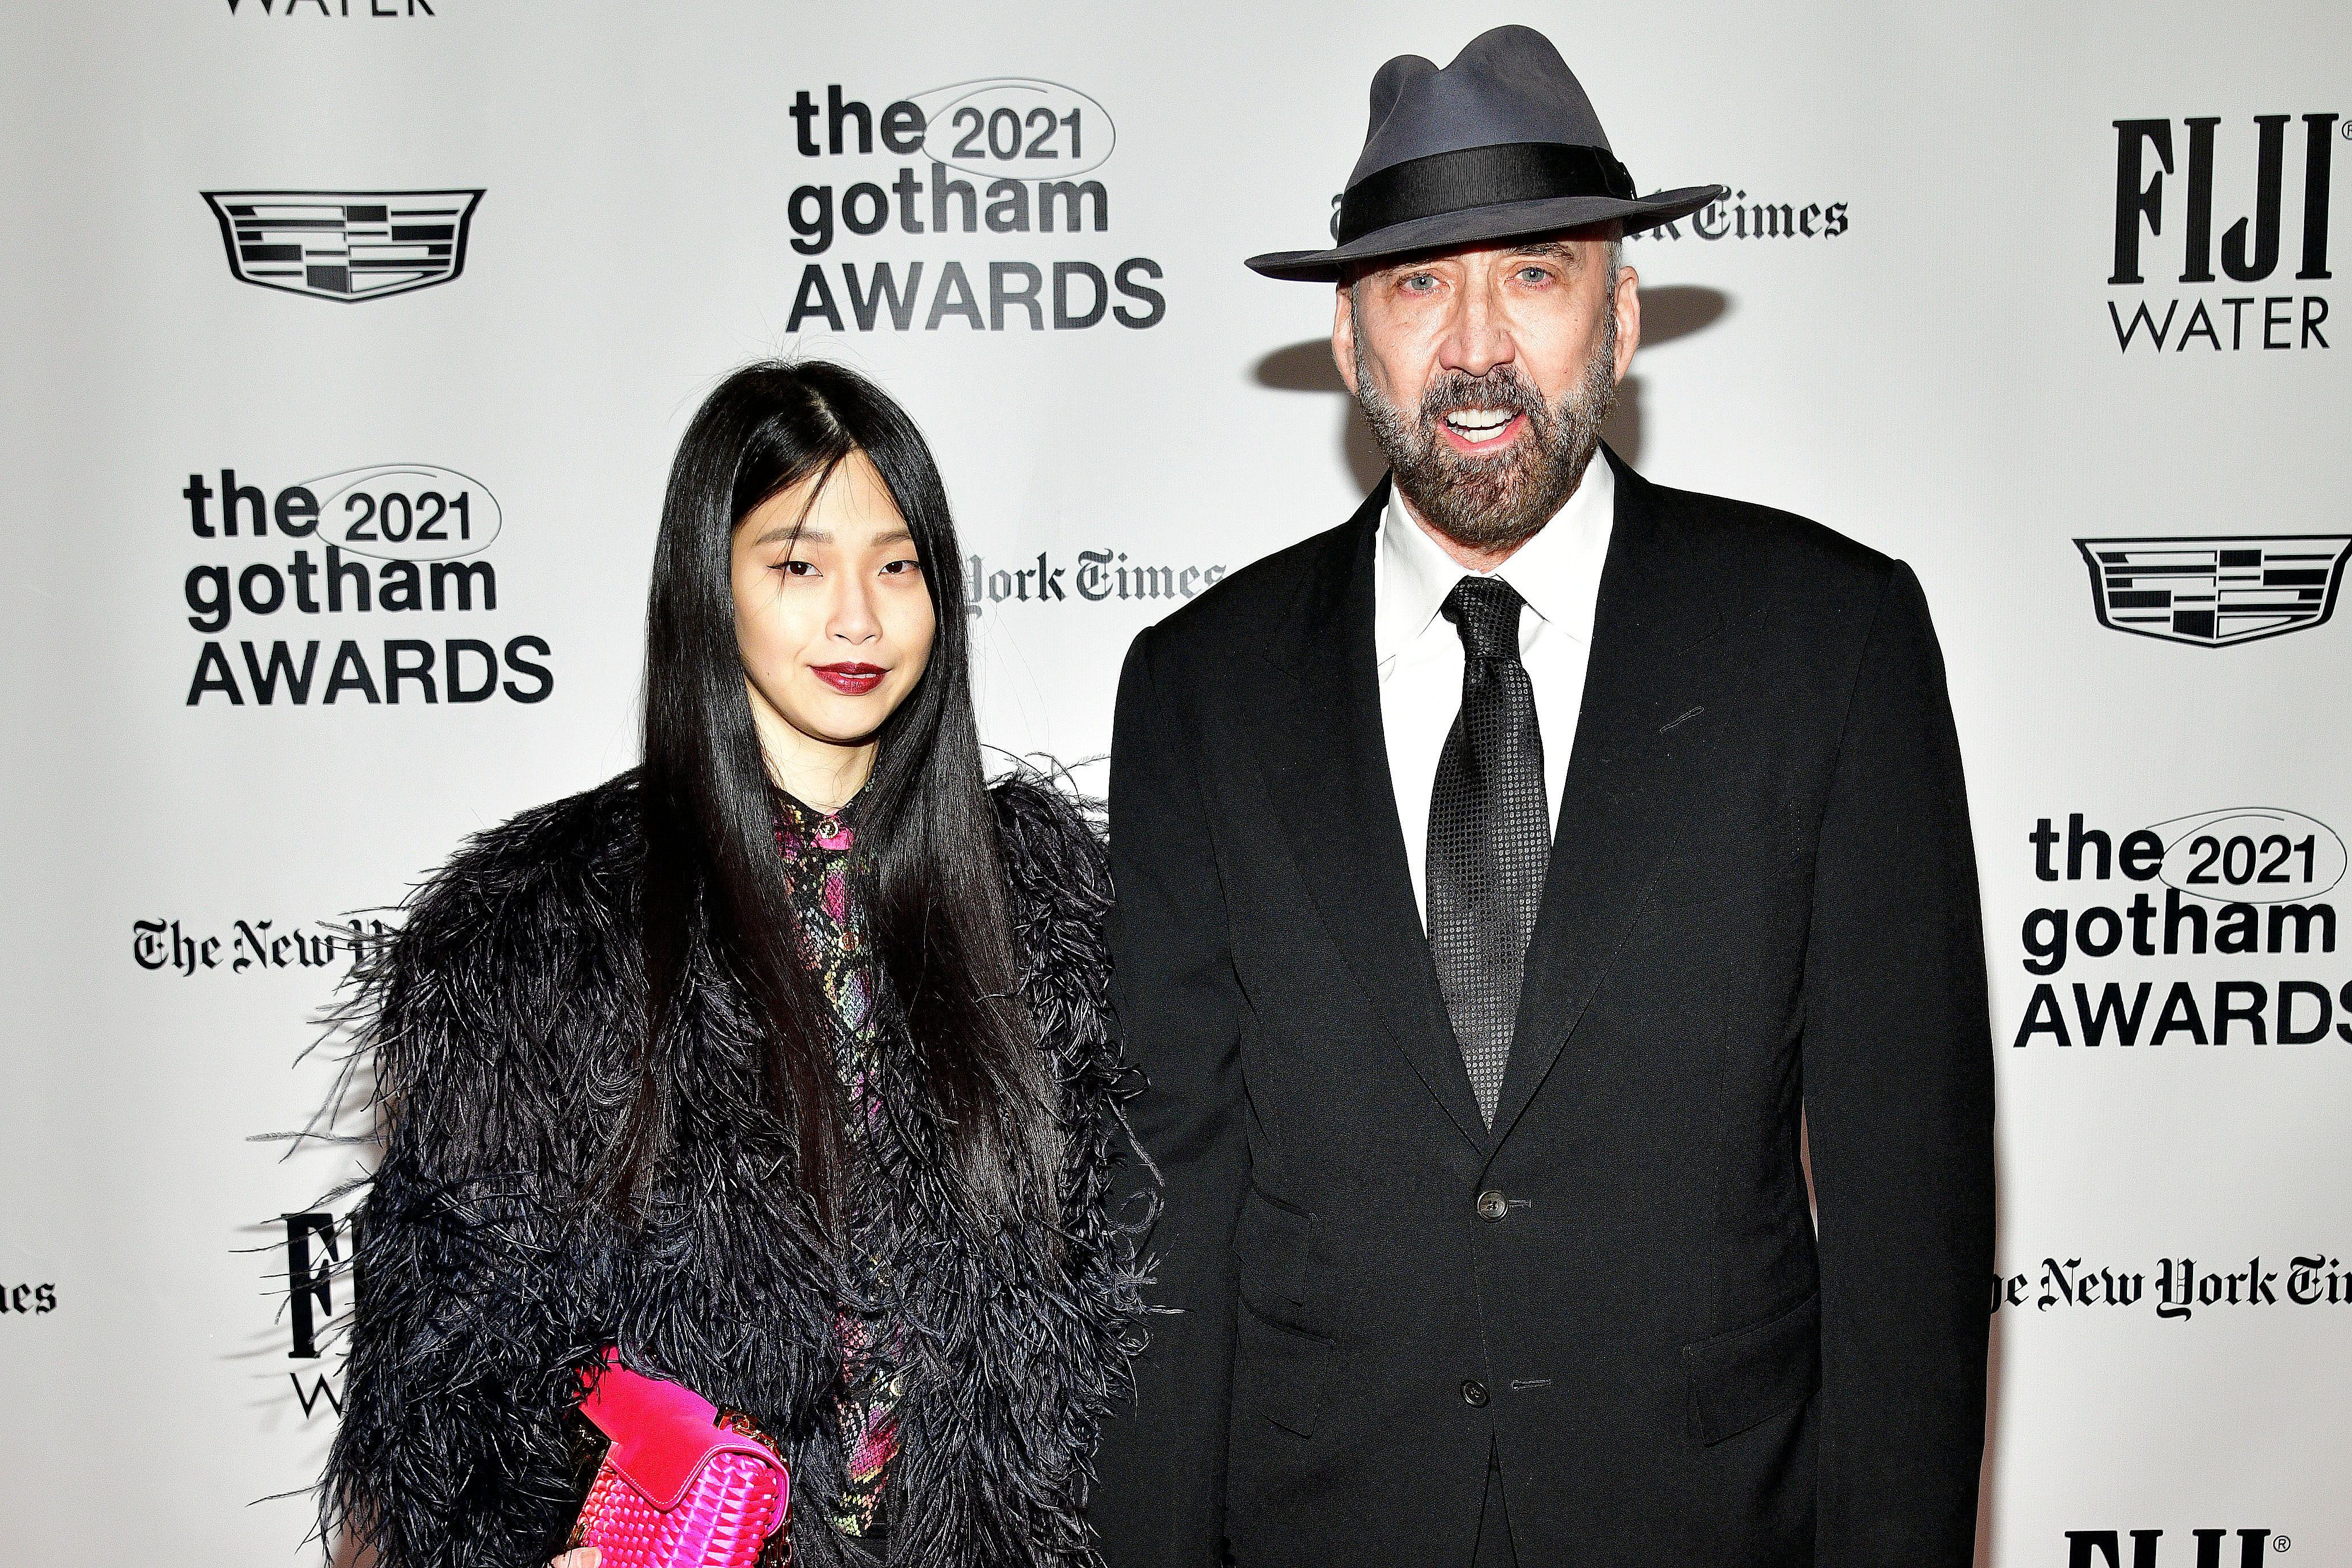 Riko Shibata and Nicolas Cage attending the 2021 Gotham Awards at Cipriani Wall Street on November 29, 2021 in New York City. / Source: Getty Images